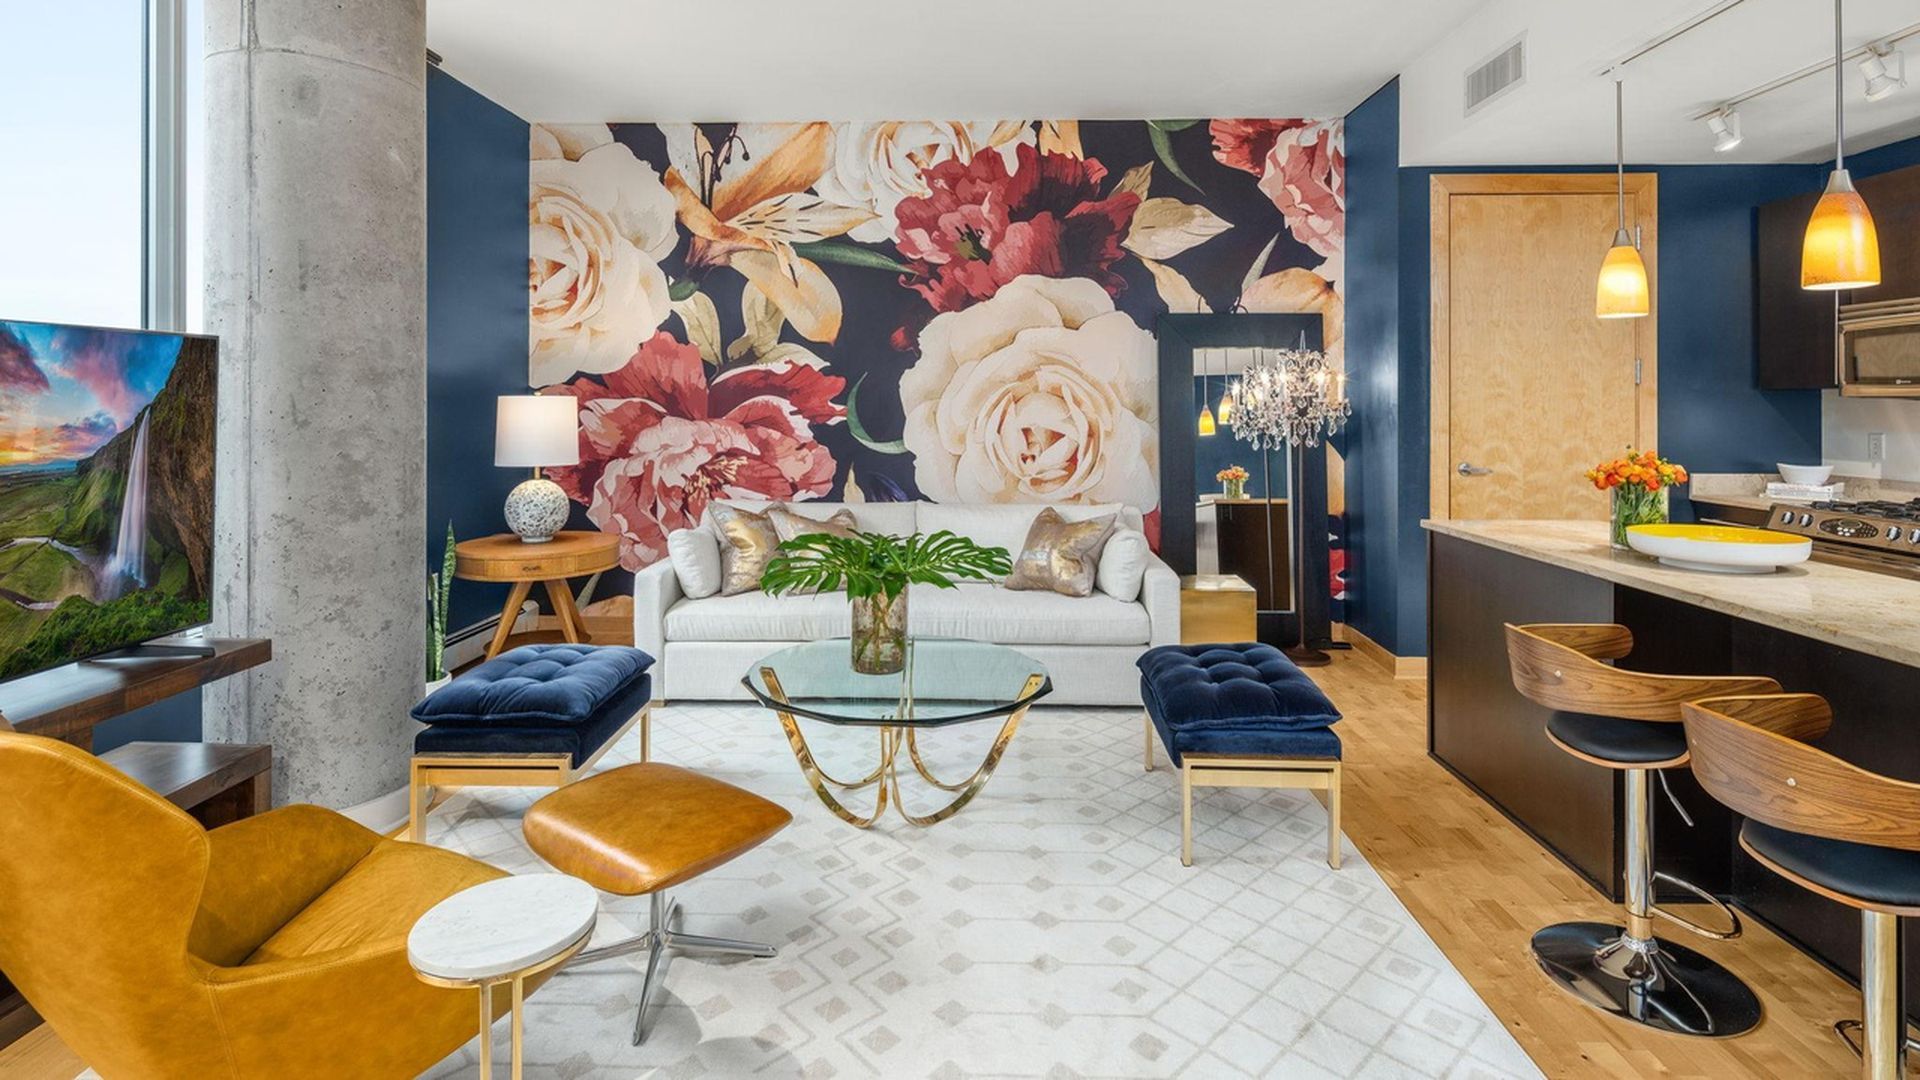 A living room with a bright floral mural on the wall and navy furniture.